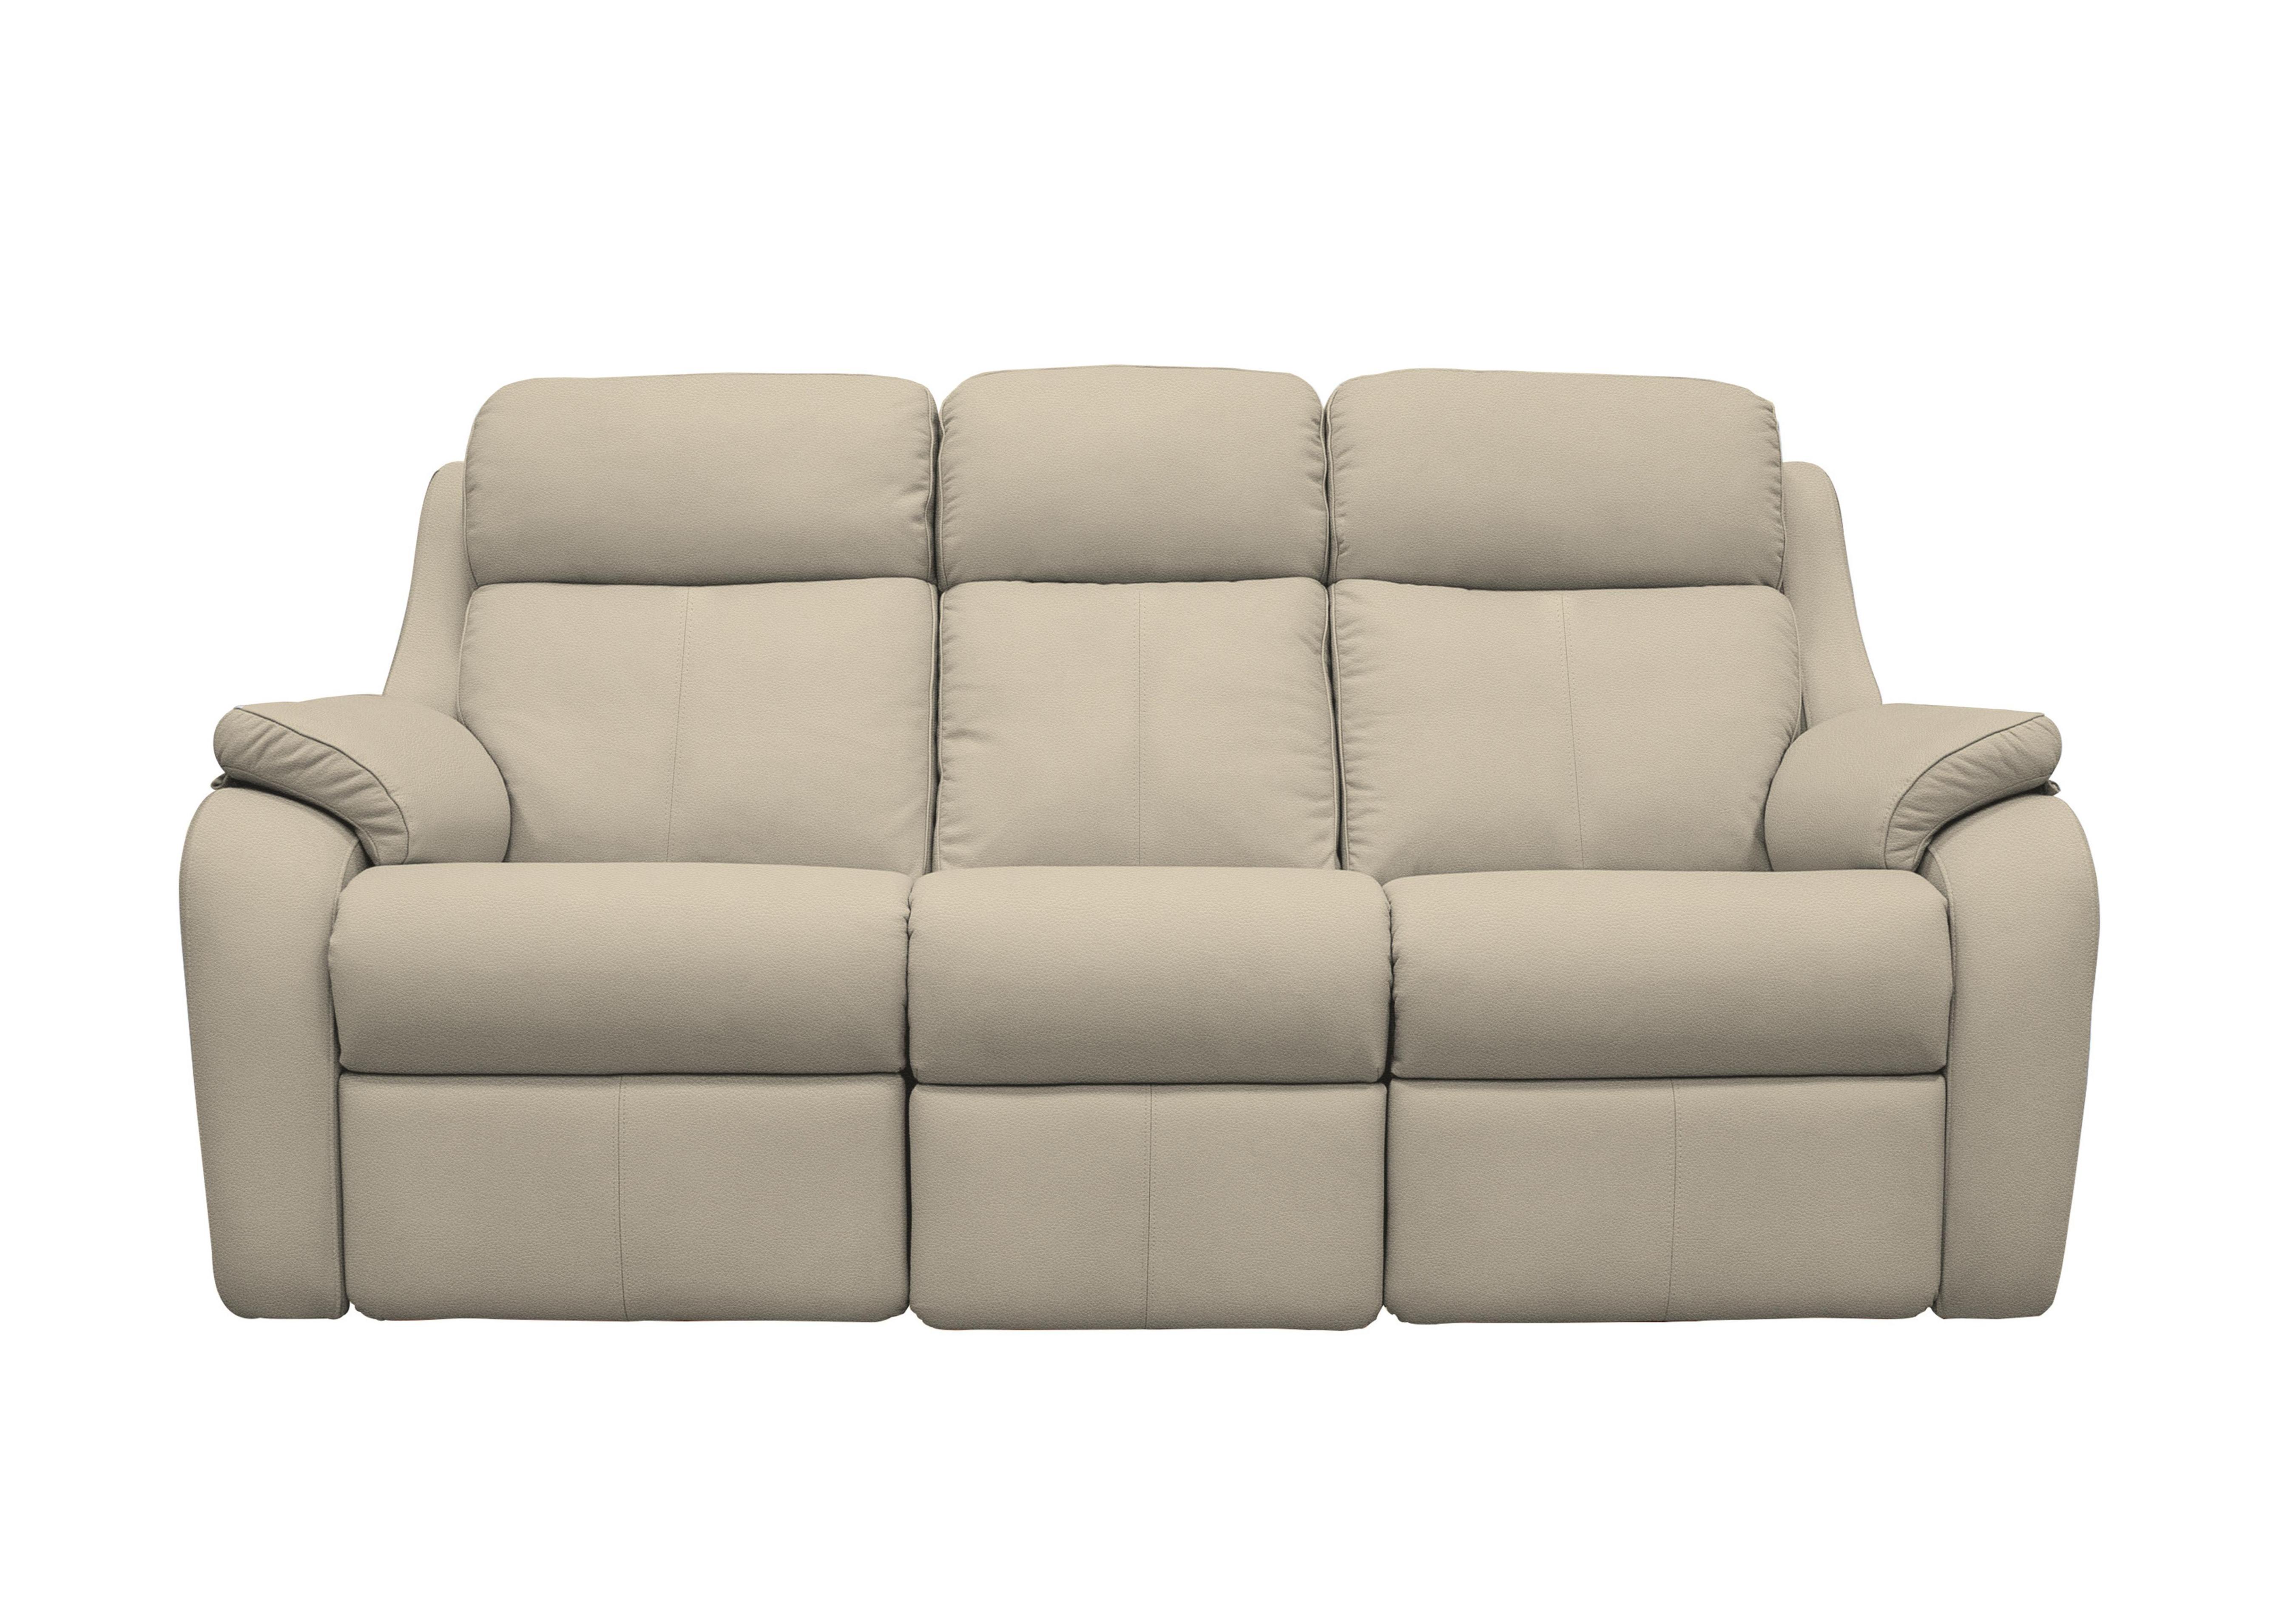 Kingsbury 3 Seater Leather Power Recliner Sofa with Power Headrests in H001 Oxford Mushroom on Furniture Village